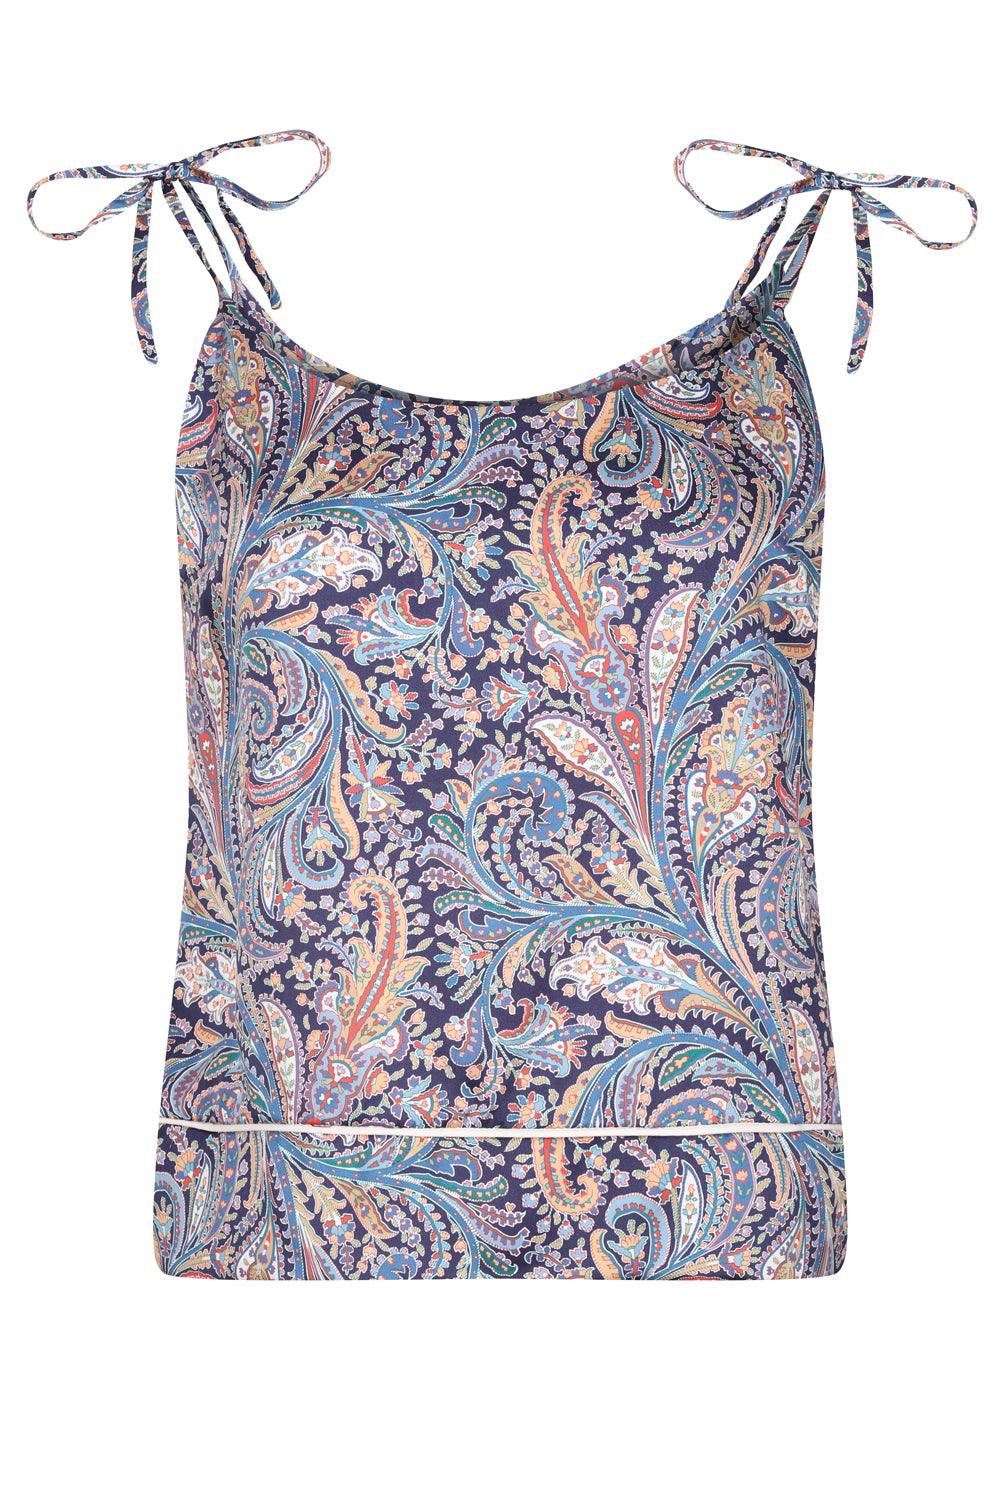 Women's Silk Camisole Top made with Liberty Fabric GREAT MISSENDEN - Coco & Wolf